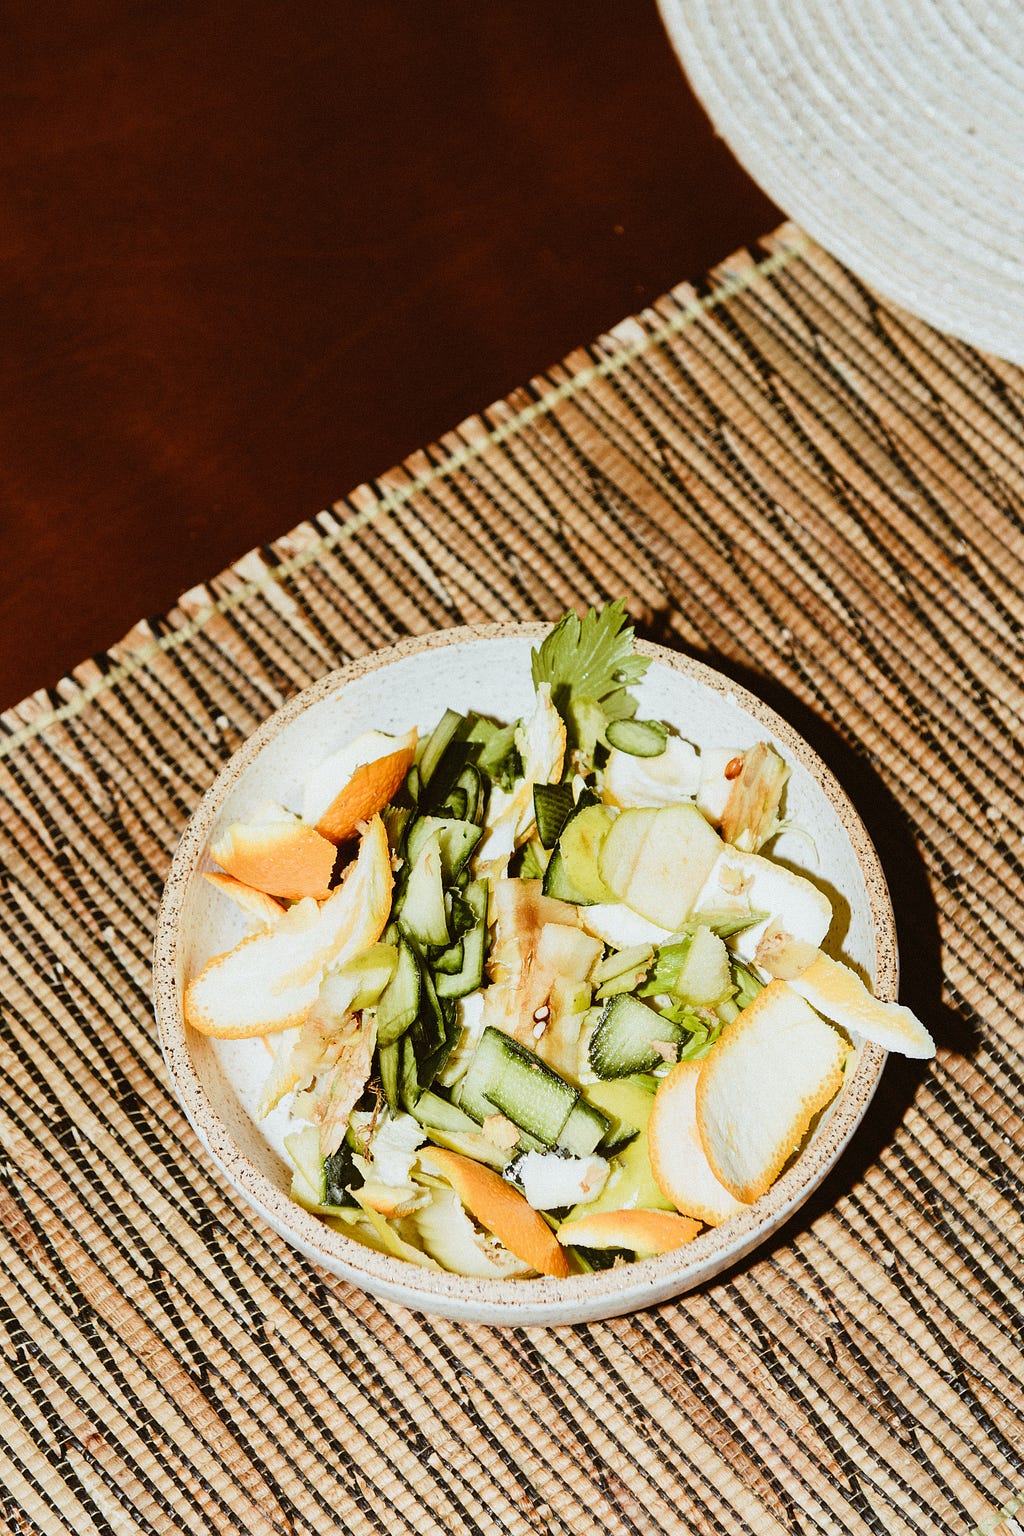 A bowl of food scraps — orange peels, cucumbers, and lettuce — atop a wood placemat.